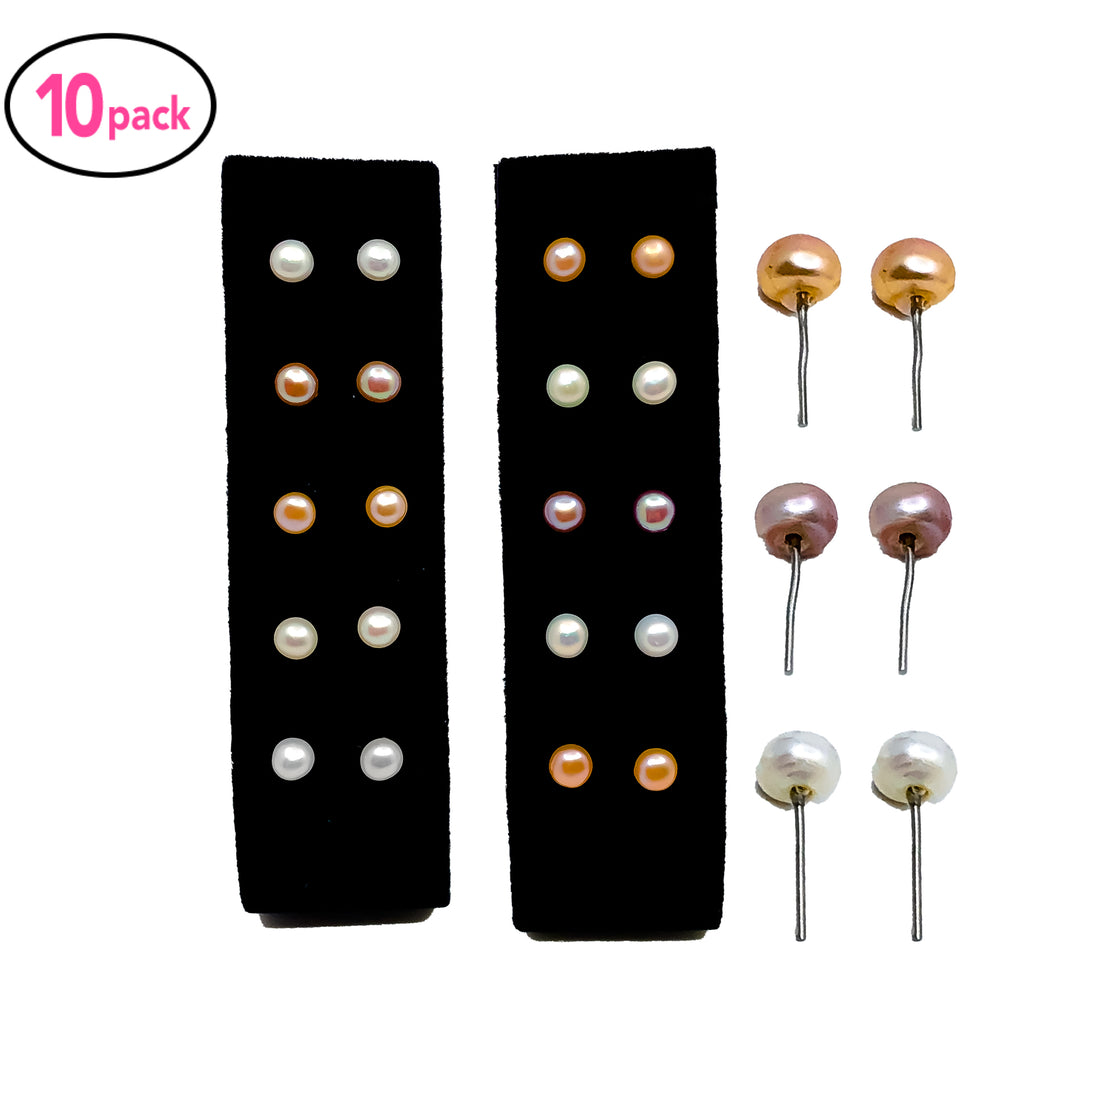 Earrings - 6-7mm Button Pearls 10 Pack Natural Colors Rhodium Coated